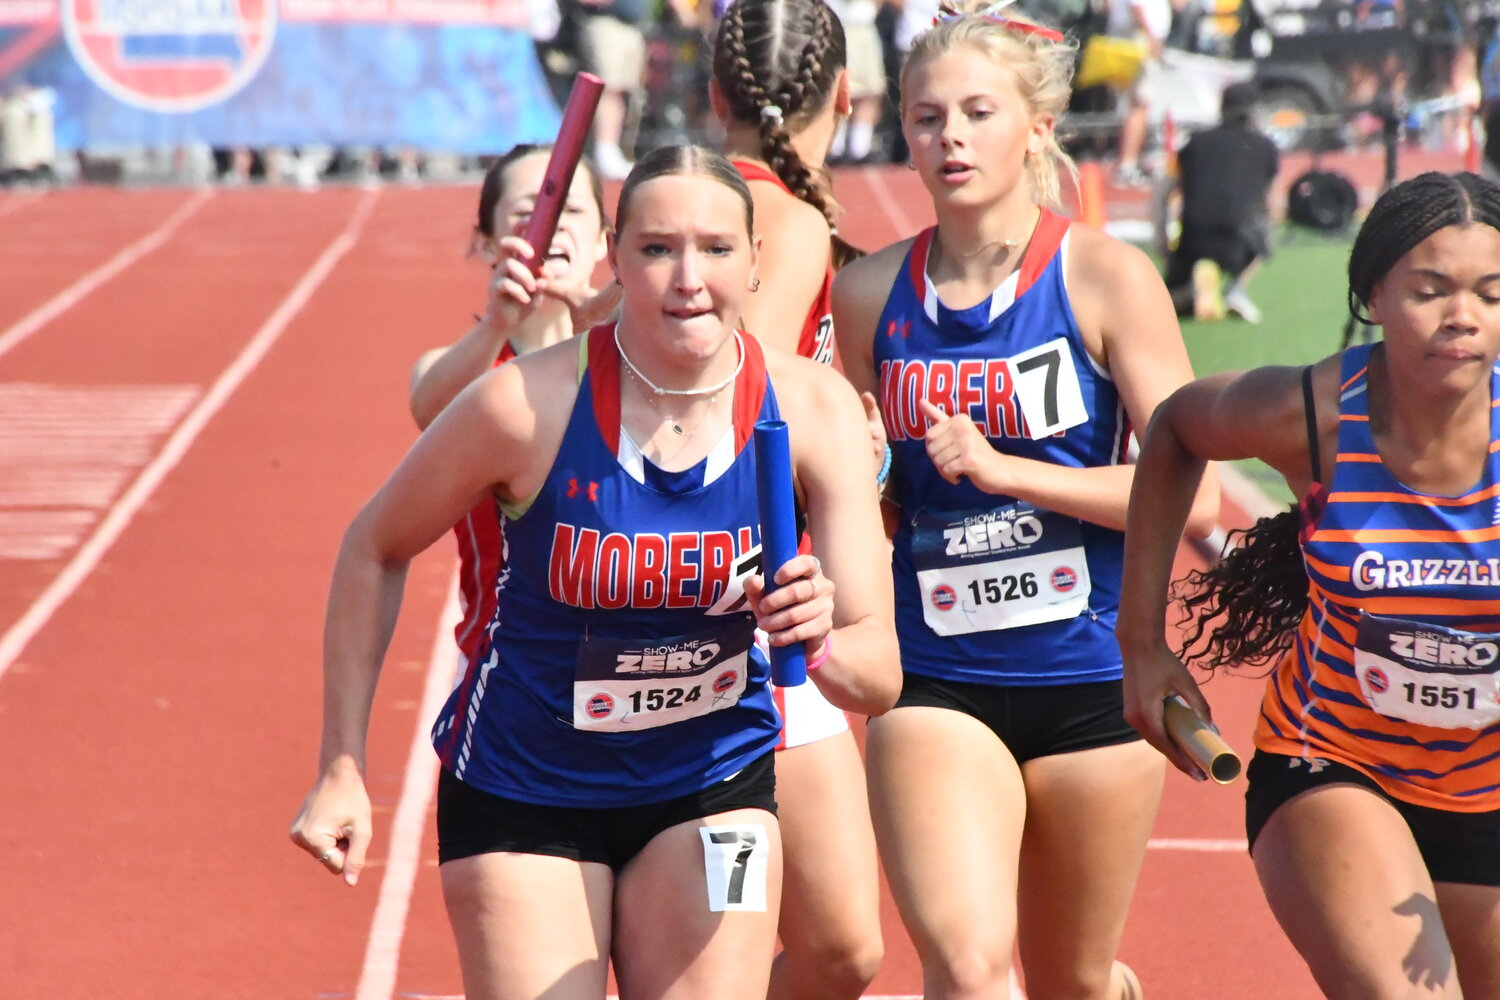 Moberly's Asa Fanning (left) accepts the baton from teammate Bryleigh Knox during the girls Class 4 4x400-meter relay finals at the Missouri State High School Activities Association track and field championships Saturday in Jefferson City. The foursome placed seventh in a time of 4:10.20, after Friday's season-best 4:08.58.